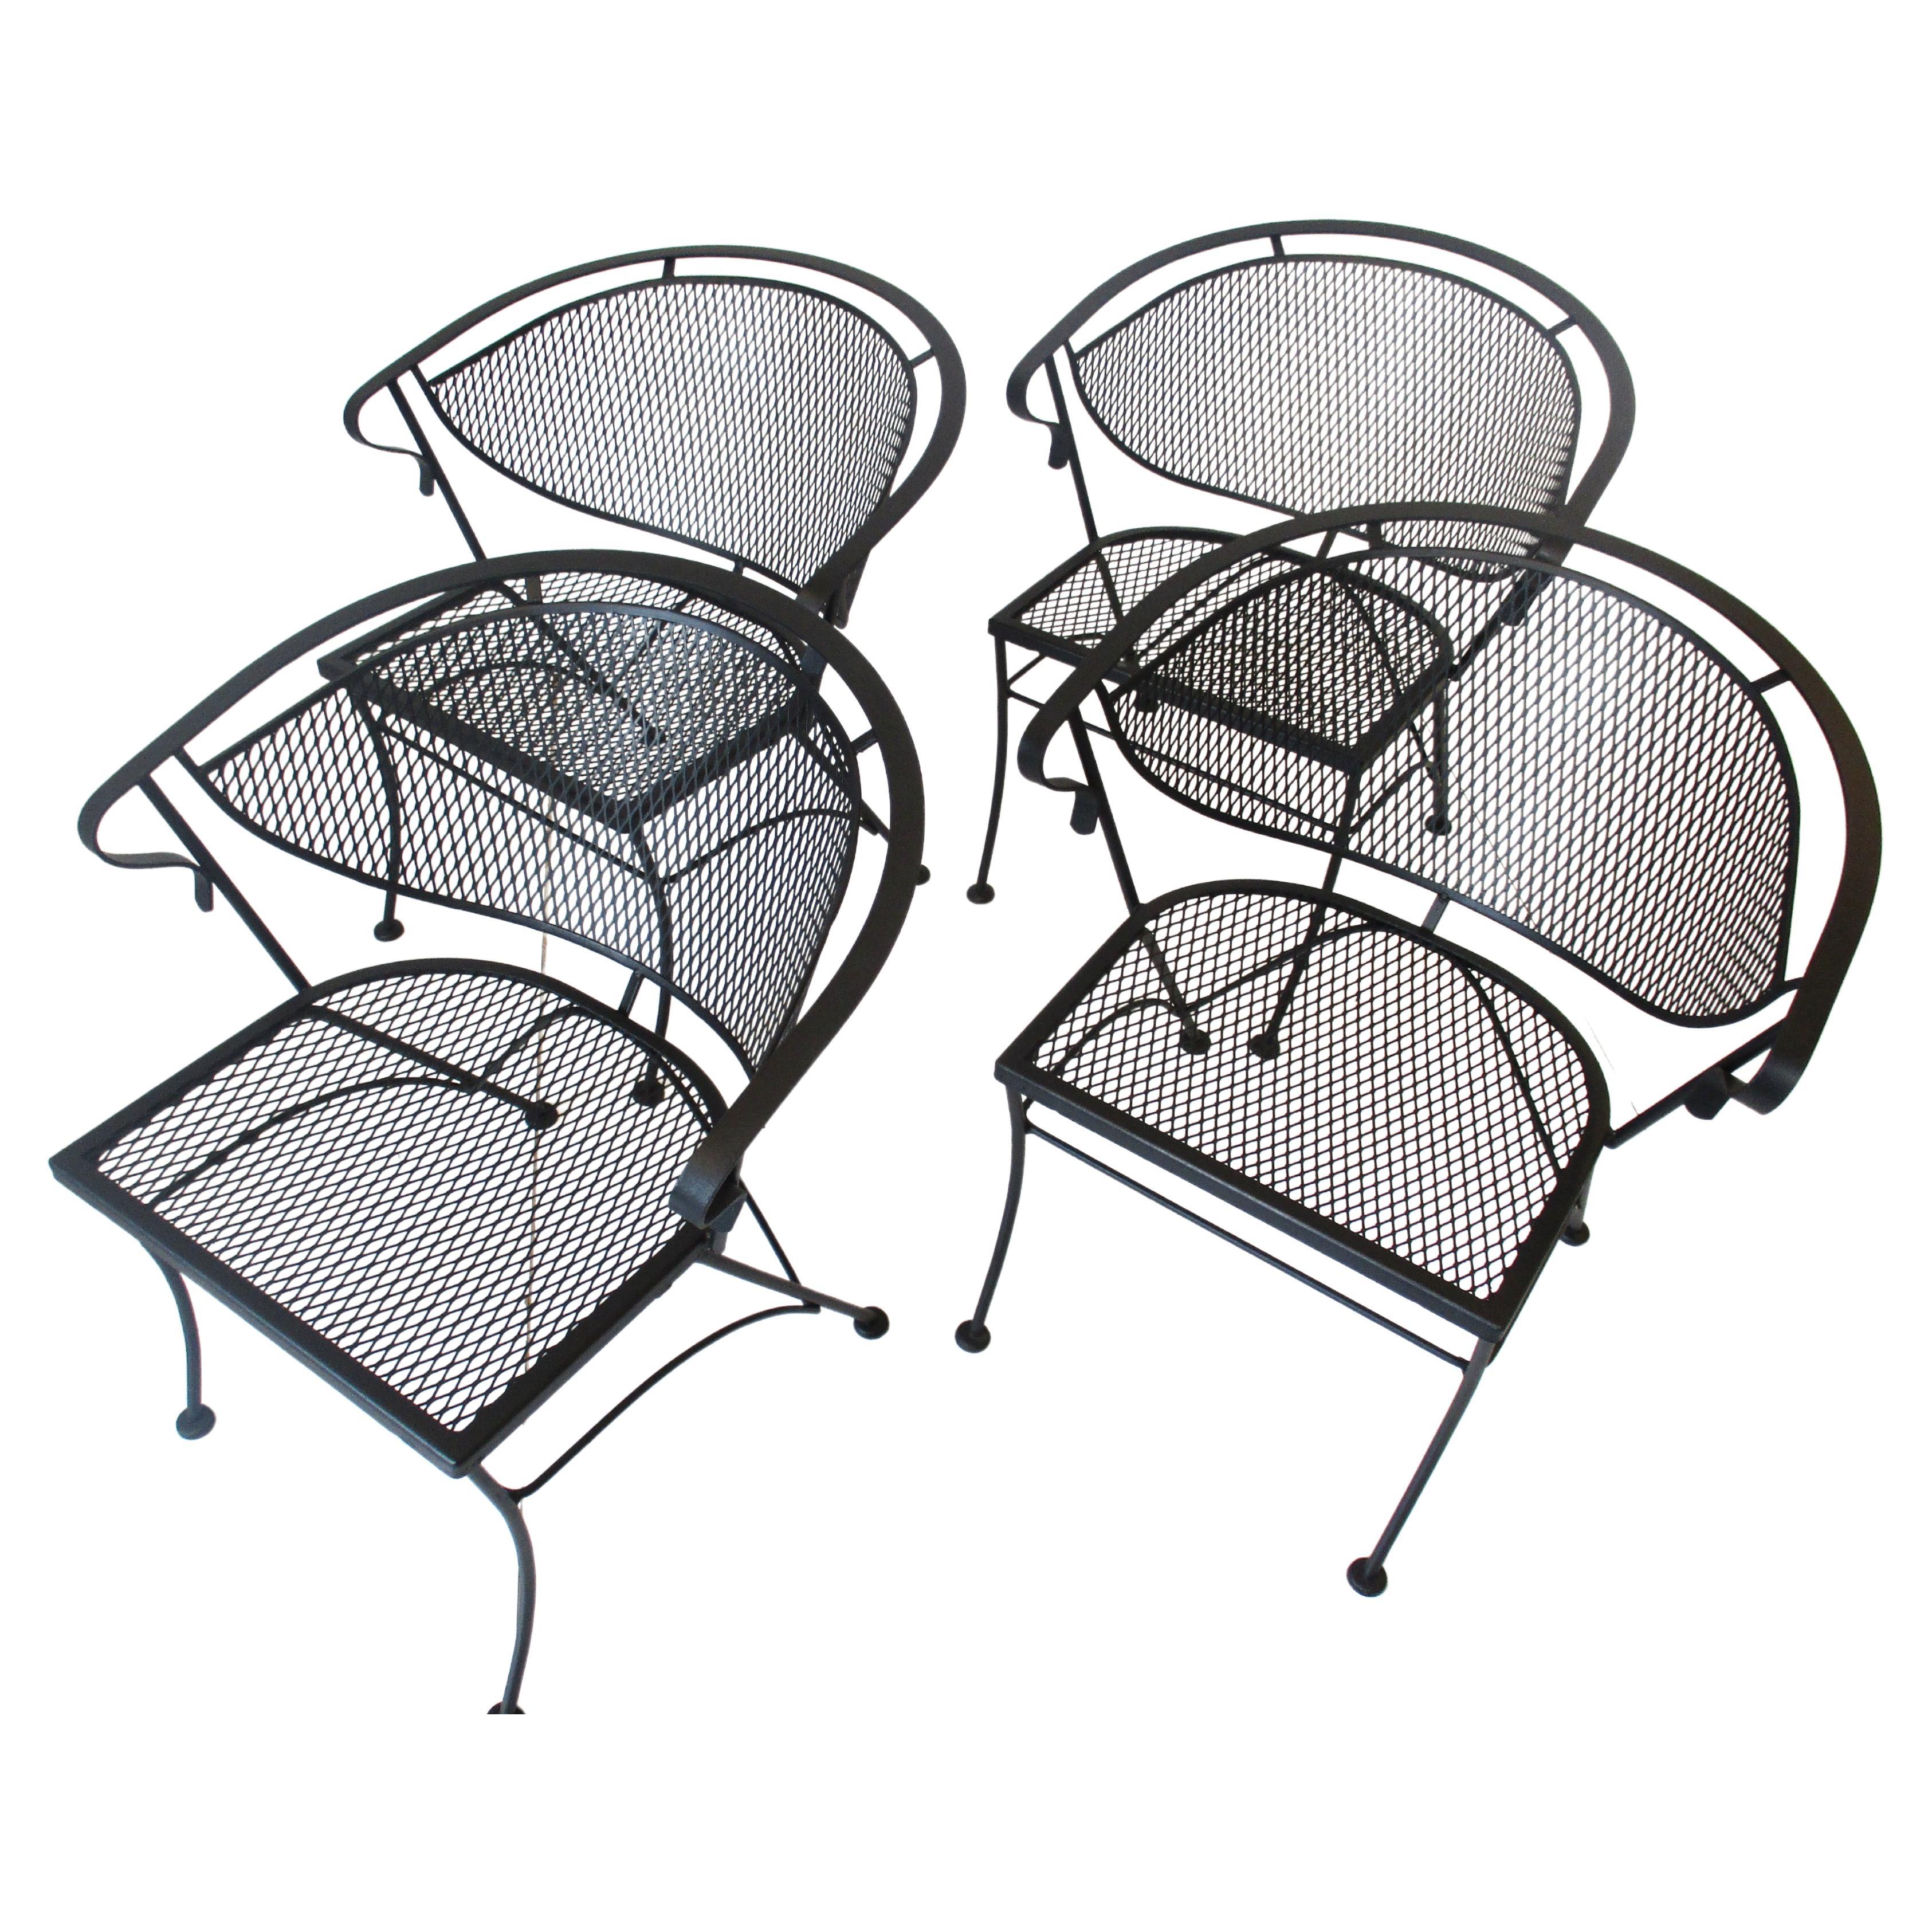 A set of four satin black mid century iron and steel mesh lounge chairs with wrap around backside and flat arm rail with nice stable foot pads. Manufactured by the Woodard furniture company known for their high quality construction and sharp style,